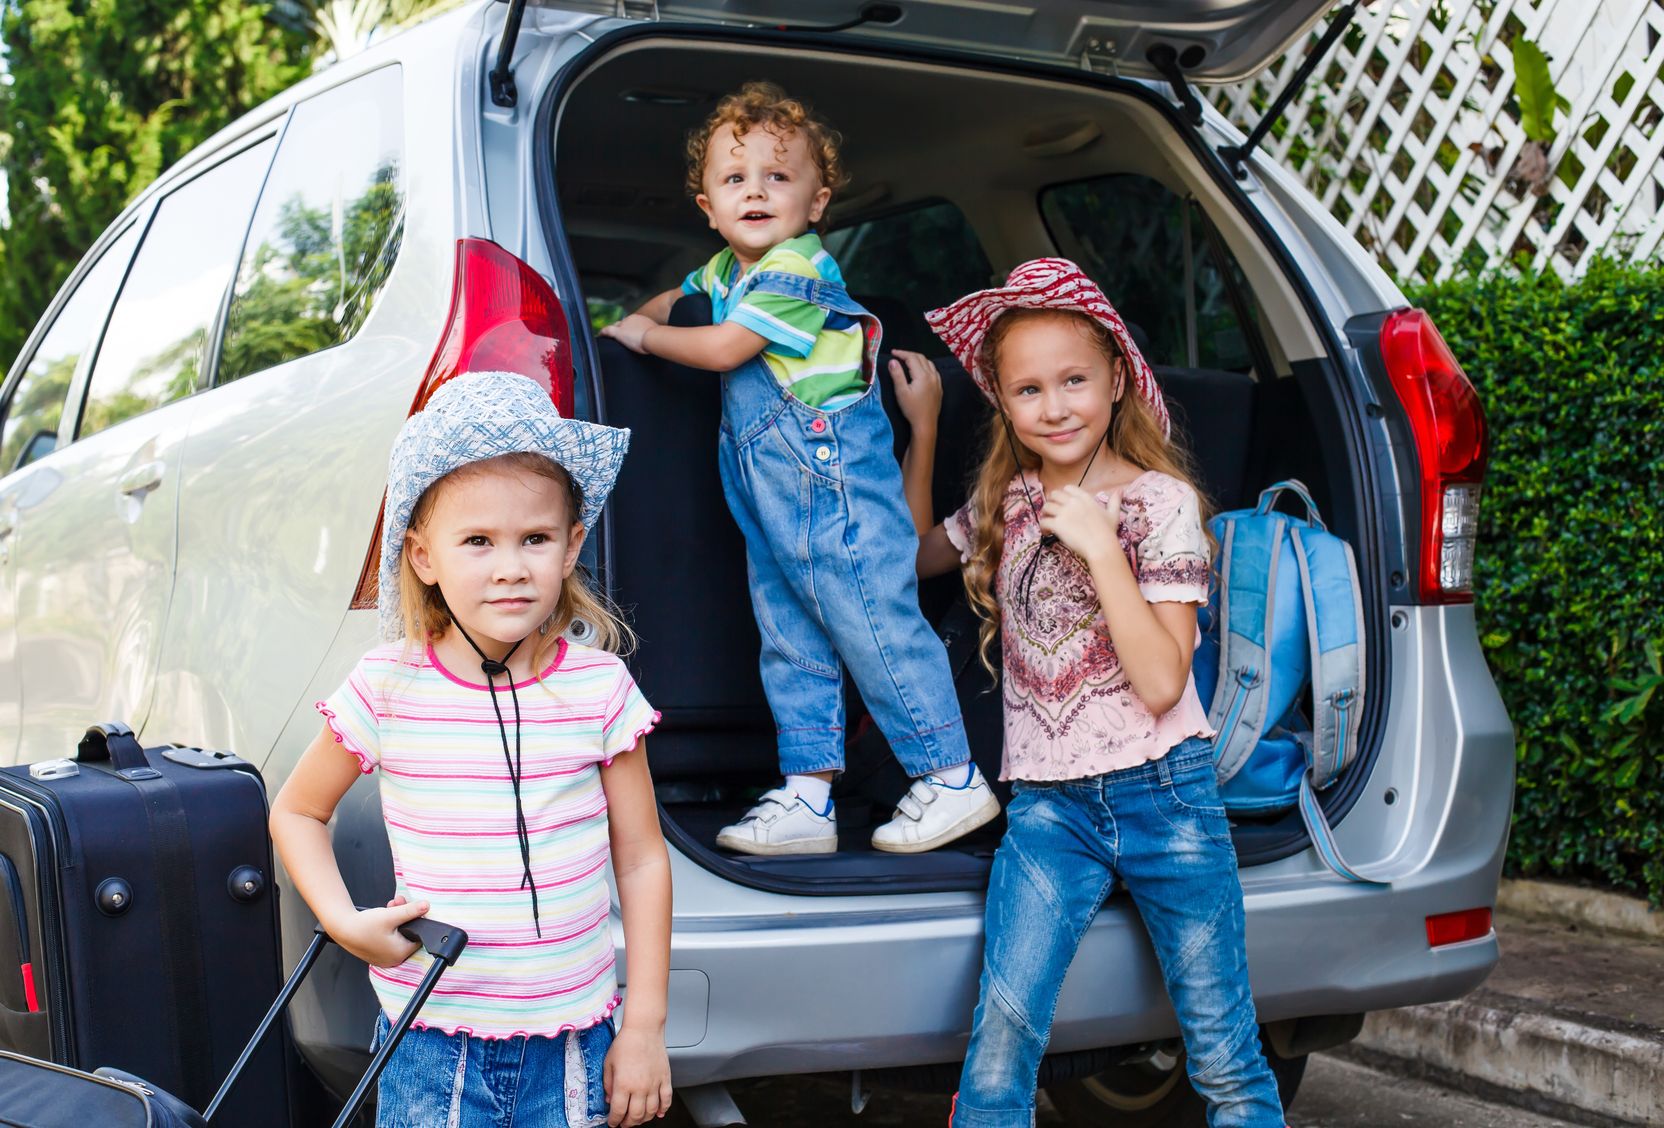 3 Great Tips to Keep Your Young Kids Happy on Your Family Road Trip